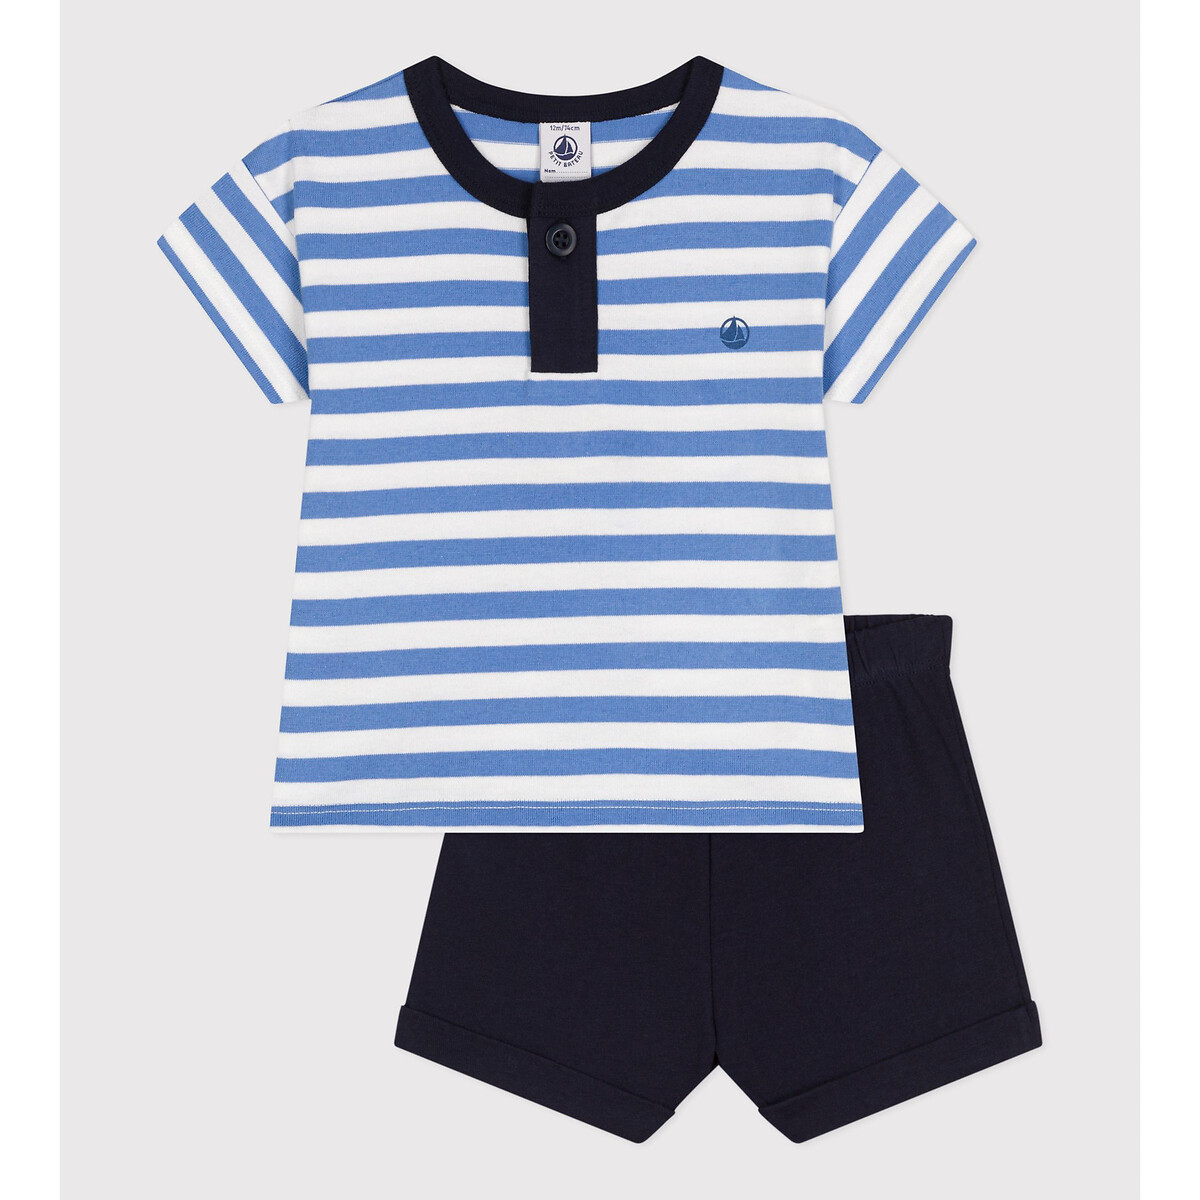 Cotton Jersey T-Shirt/Shorts Outfit